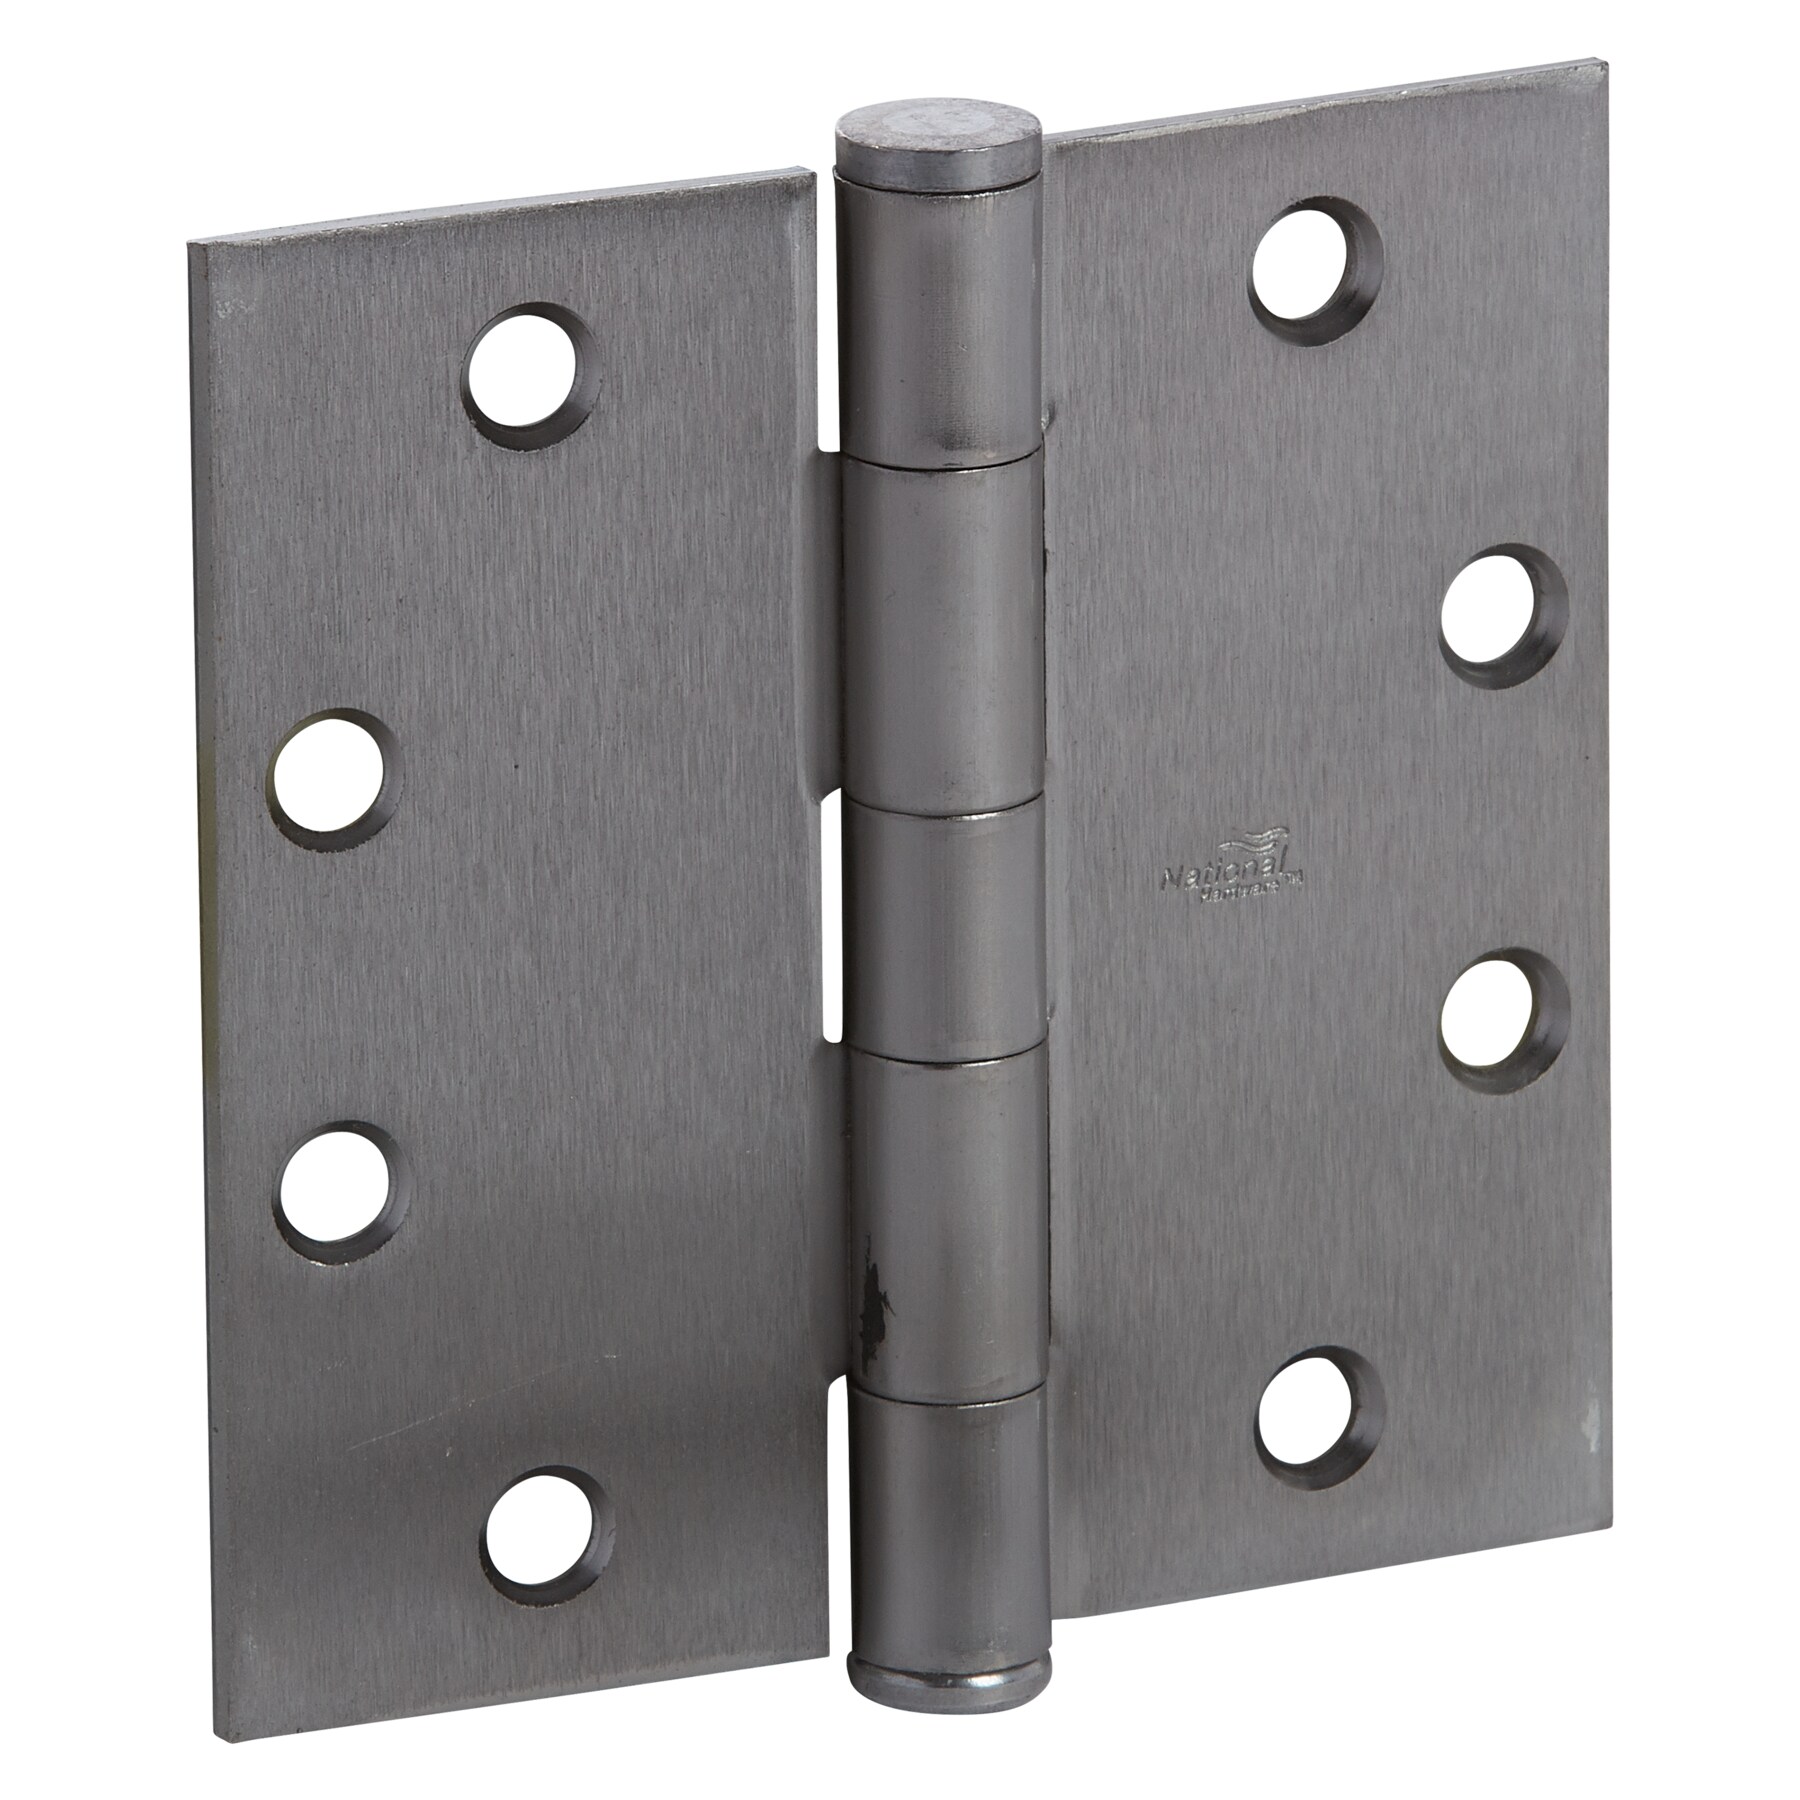 4 Bearing Heavy Weight by Dependable Direct Commercial Door Hinge Satin Chrome Finish Pack of 1 4.5 inch 